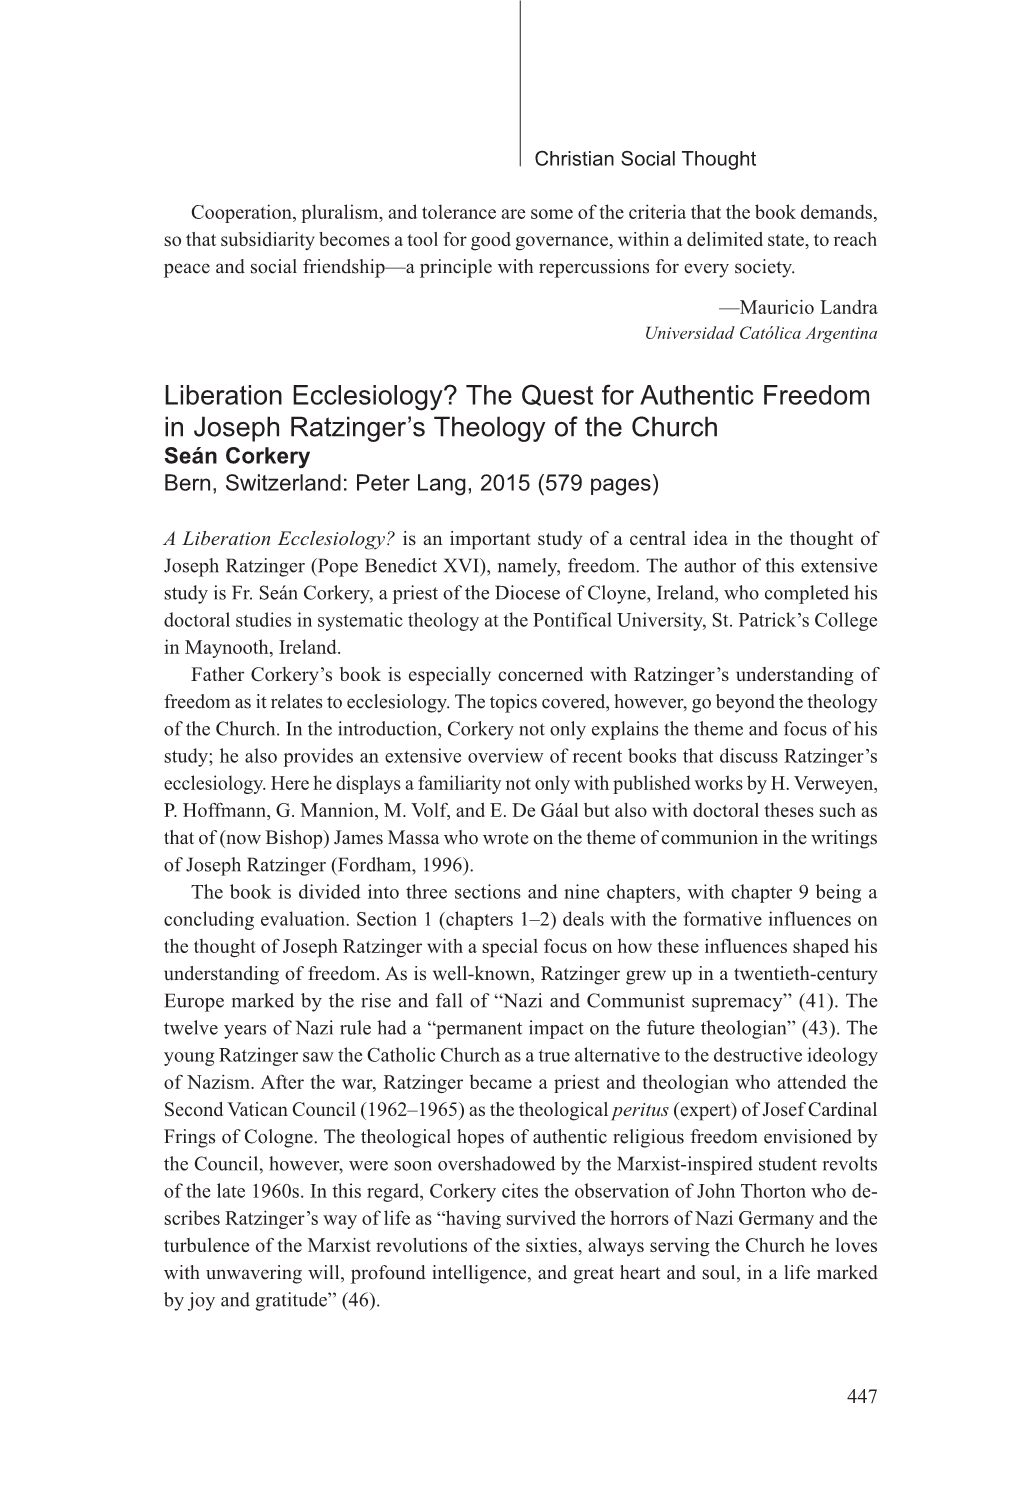 Liberation Ecclesiology? the Quest for Authentic Freedom in Joseph Ratzinger’S Theology of the Church Seán Corkery Bern, Switzerland: Peter Lang, 2015 (579 Pages)